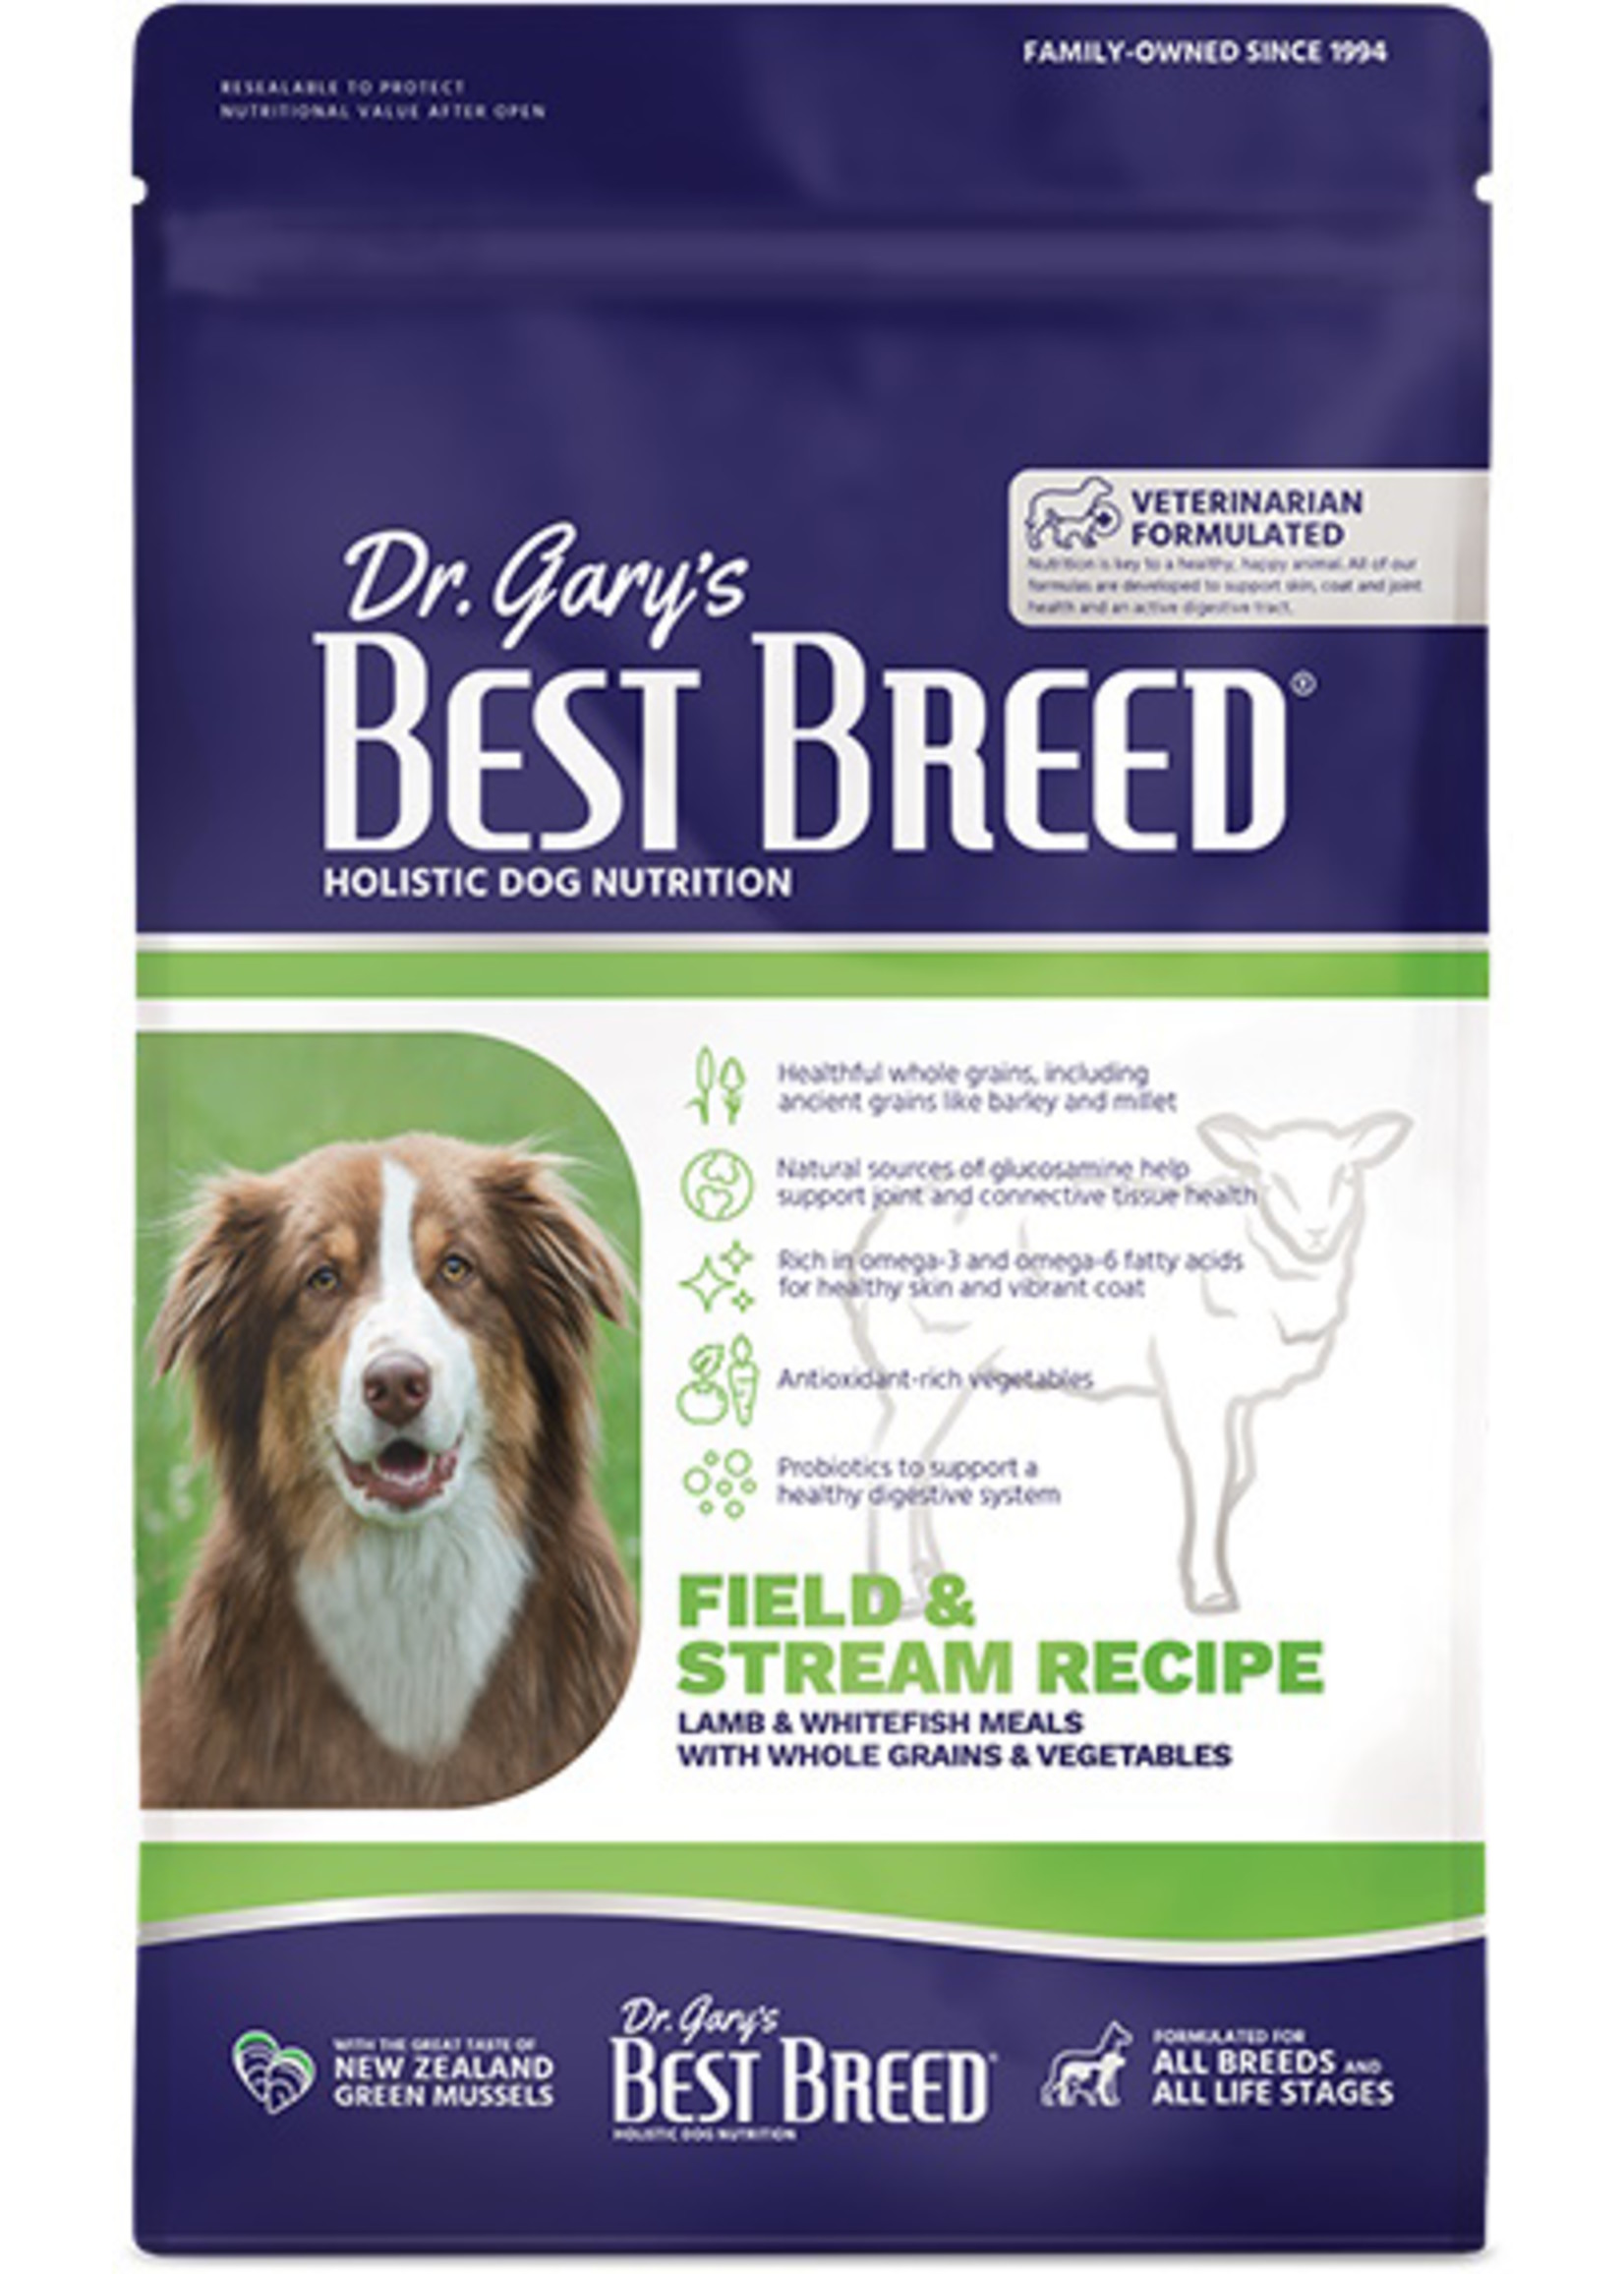 Dr. Gary's Best Breed Dr. Gary's Best Breed Holistic Field & Stream Dog Food